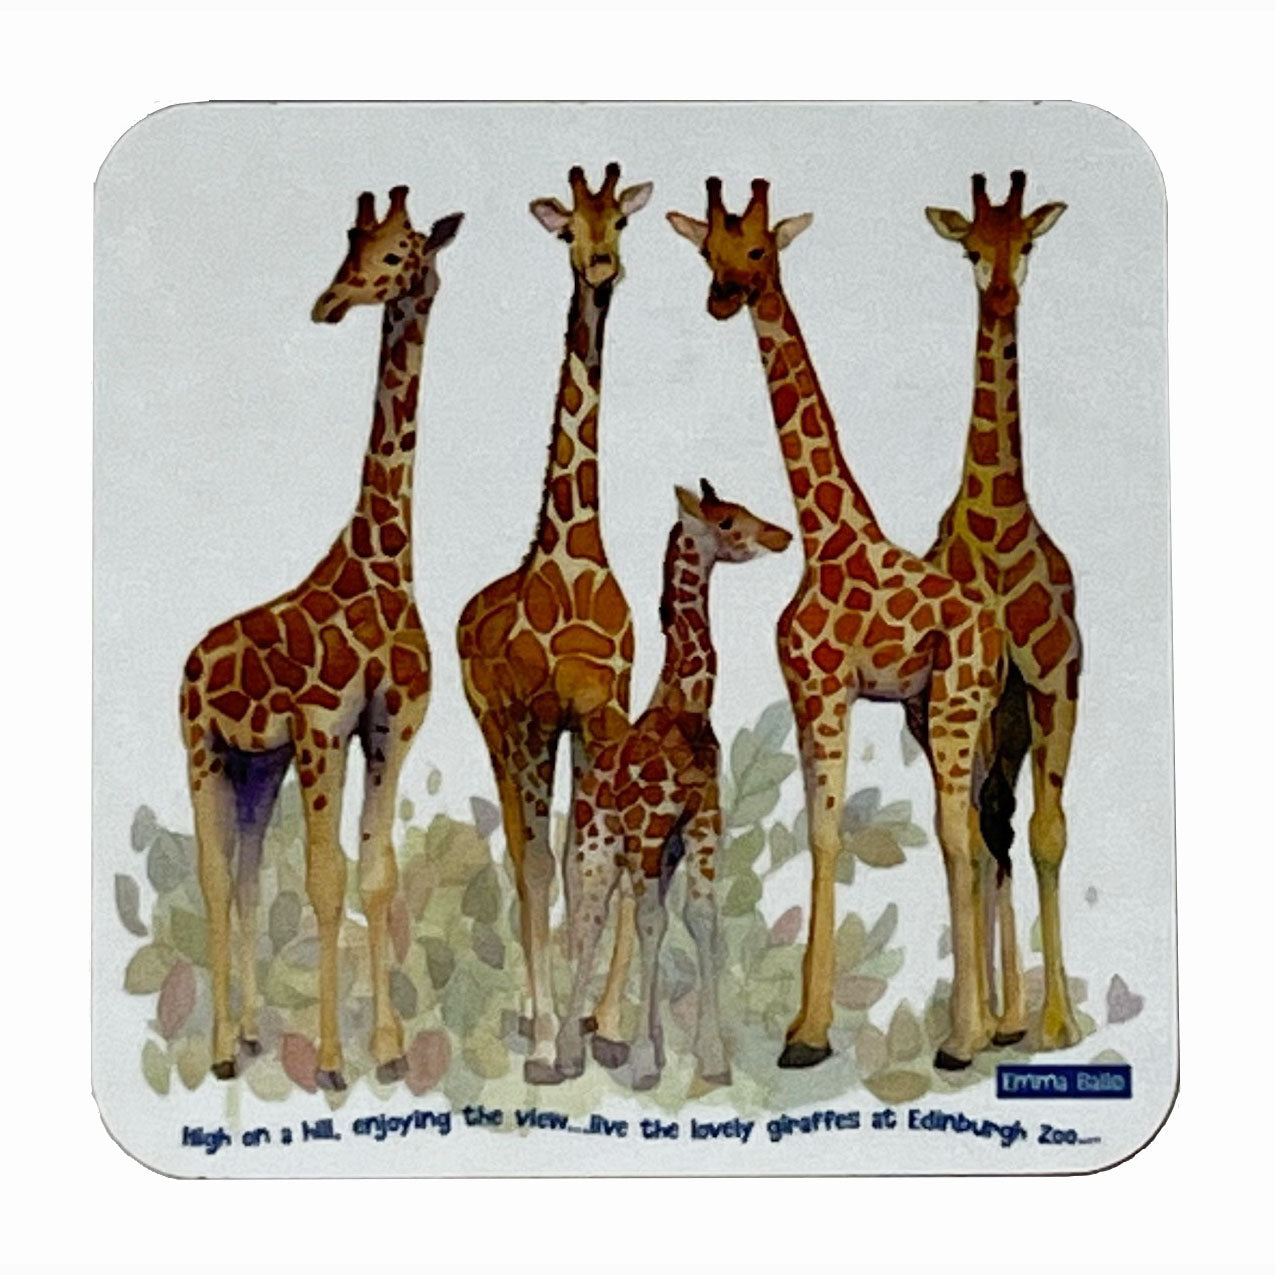 This coaster shows an Edinburgh Zoo exclusive giraffe design by Emma Ball. These coasters will make a great addition to any room and is a perfect gift!   The coaster will also go well with our Emma Ball Giraffe Placemats.   Designed and made in the UK.   Dimensions: 29 x 22cm.